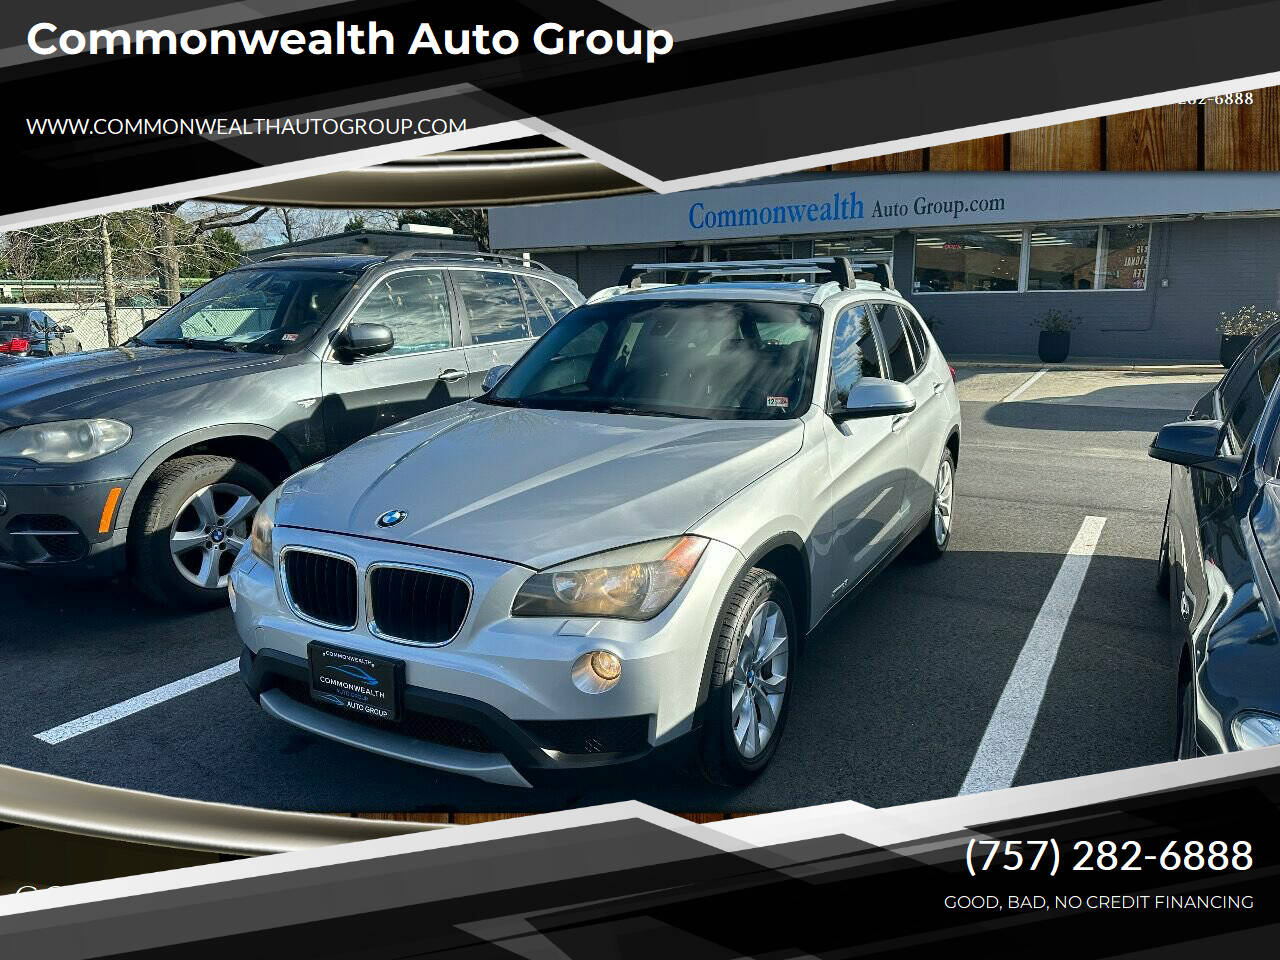 BMW X1 For Sale in Portsmouth, VA - TOWN AUTOPLANET LLC